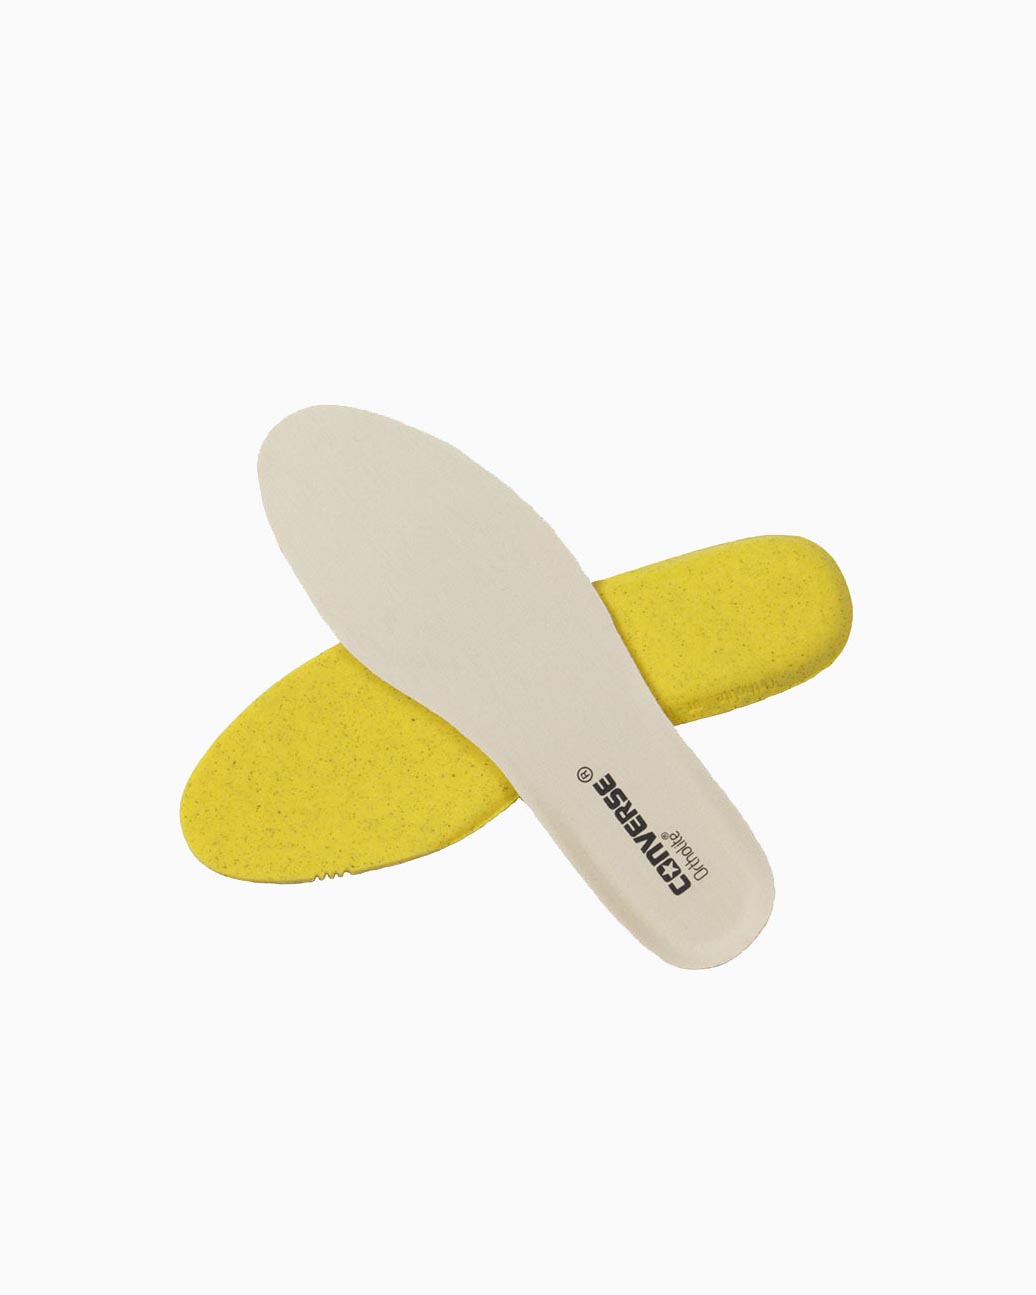 OrthoLite CUP INSOLE